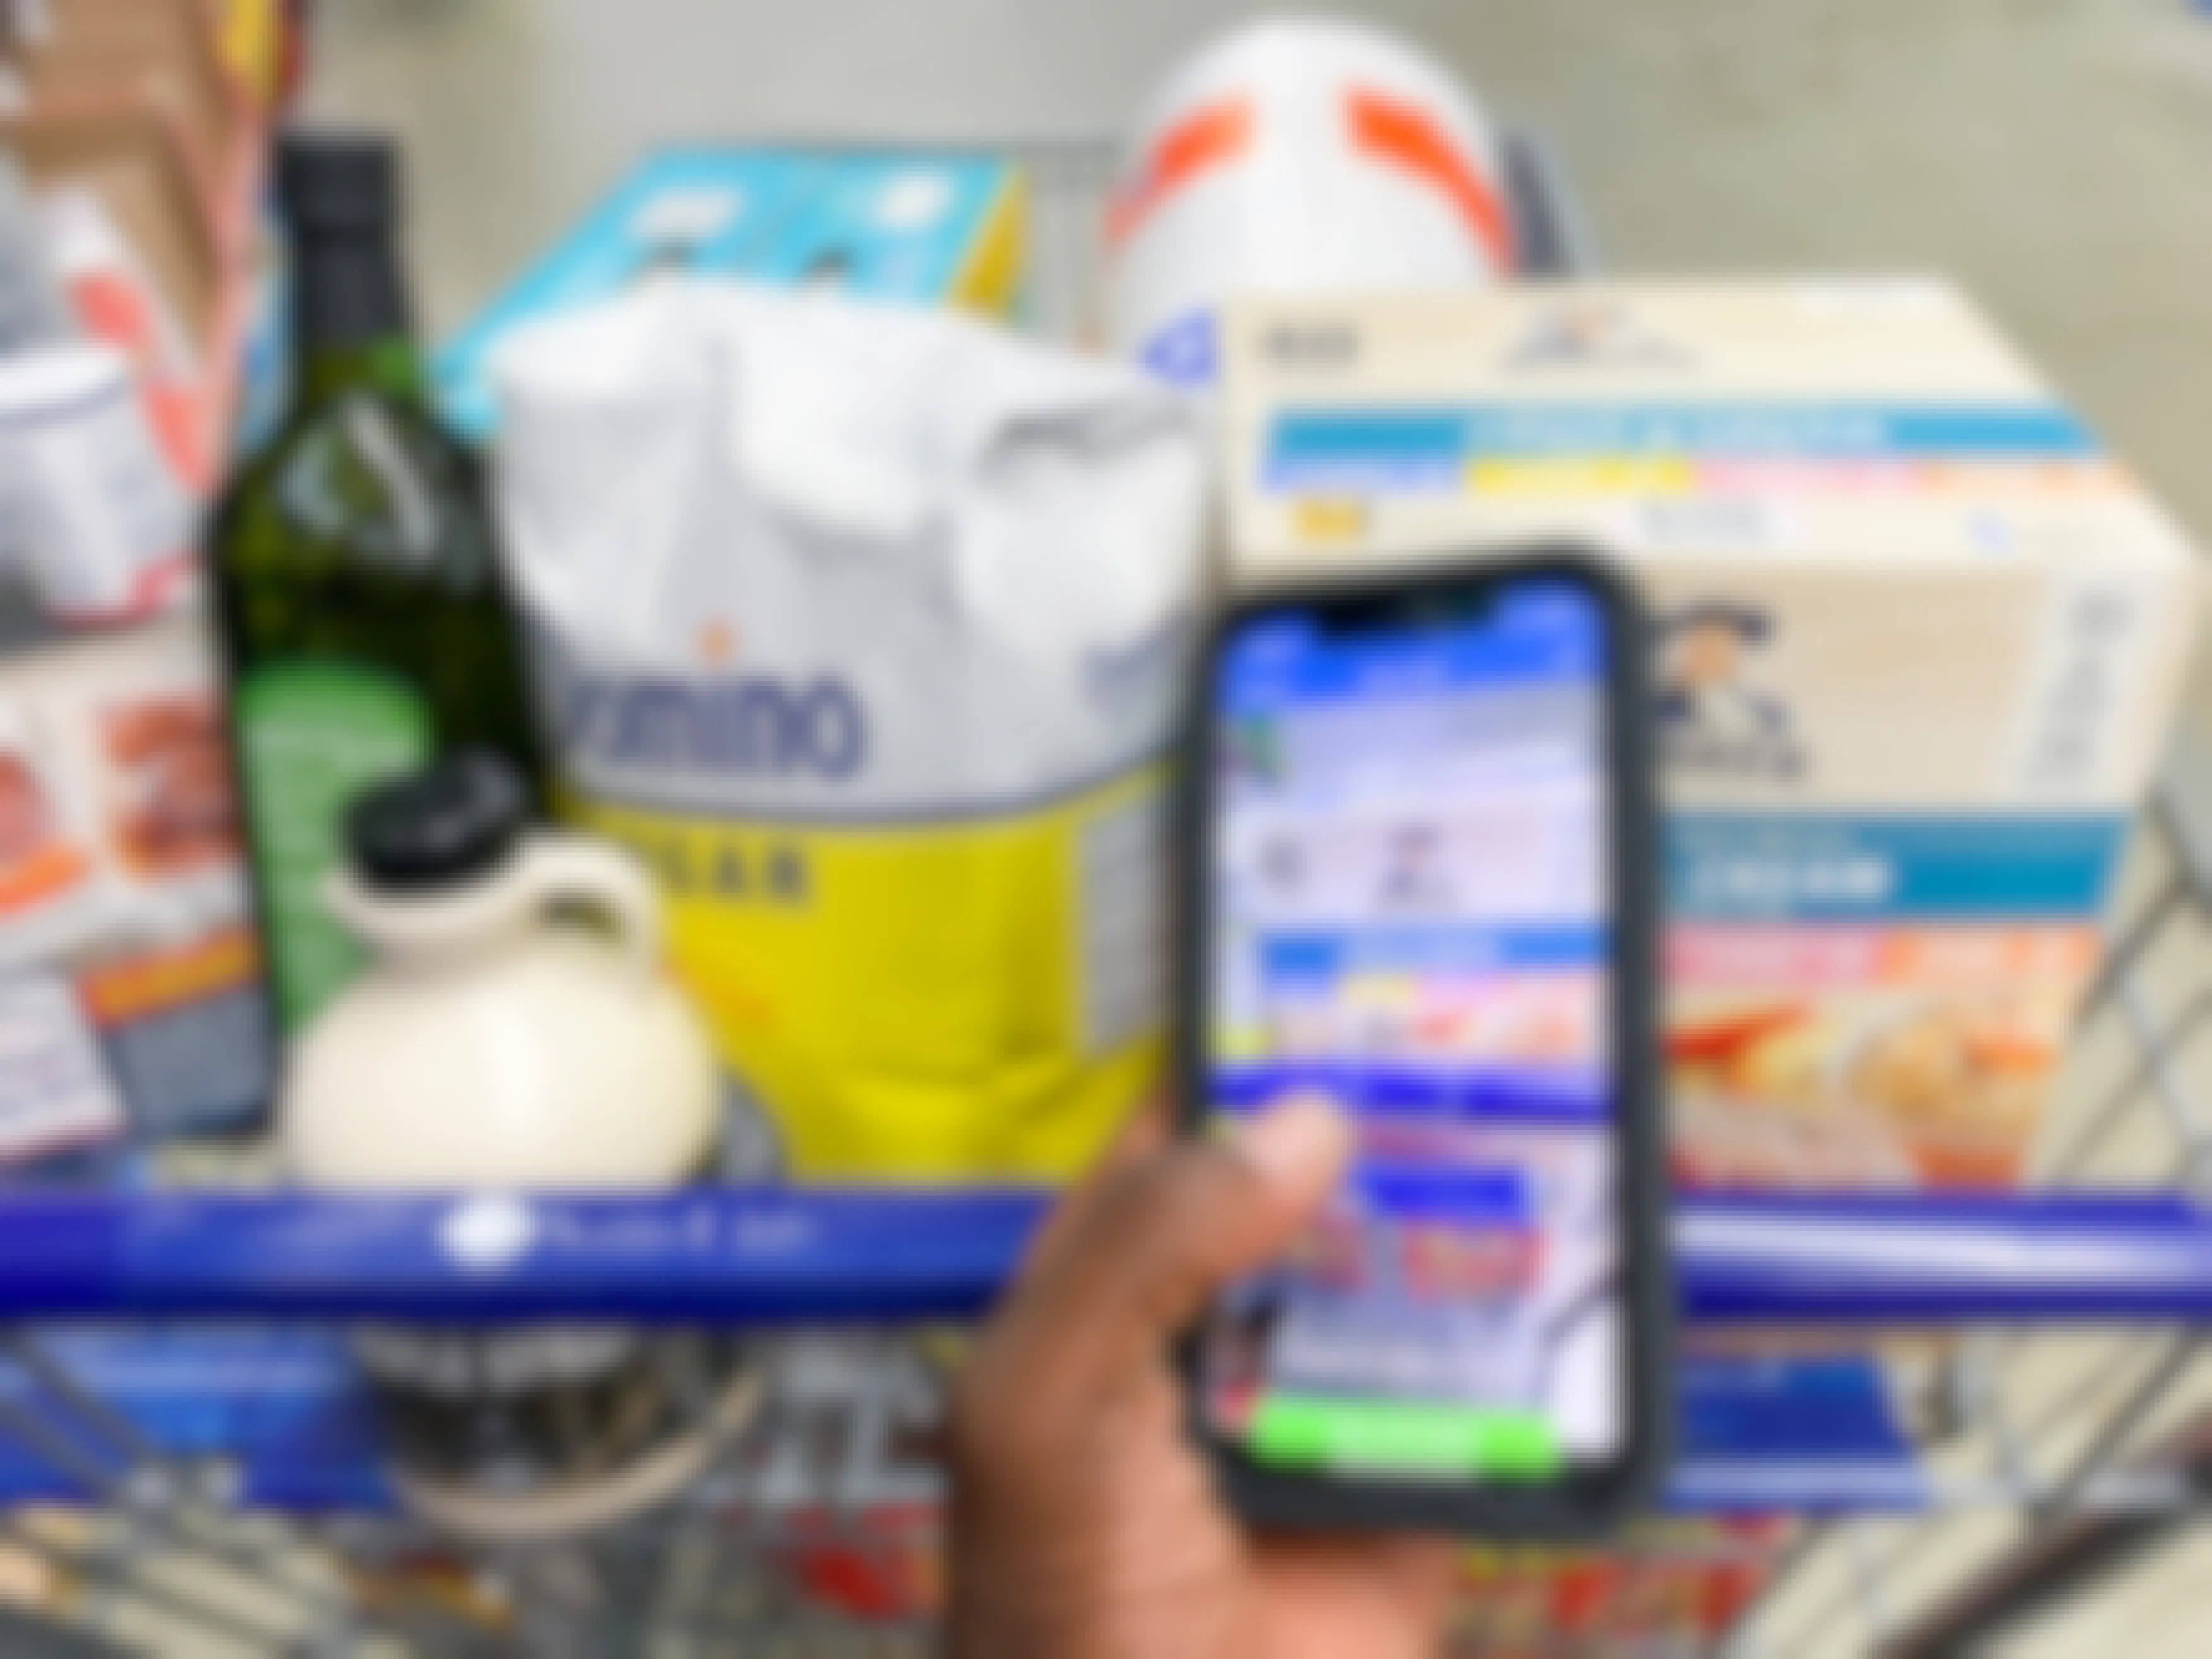 phone held in hand scanning a box of instant oatmeal inside a shopping cart full of groceries